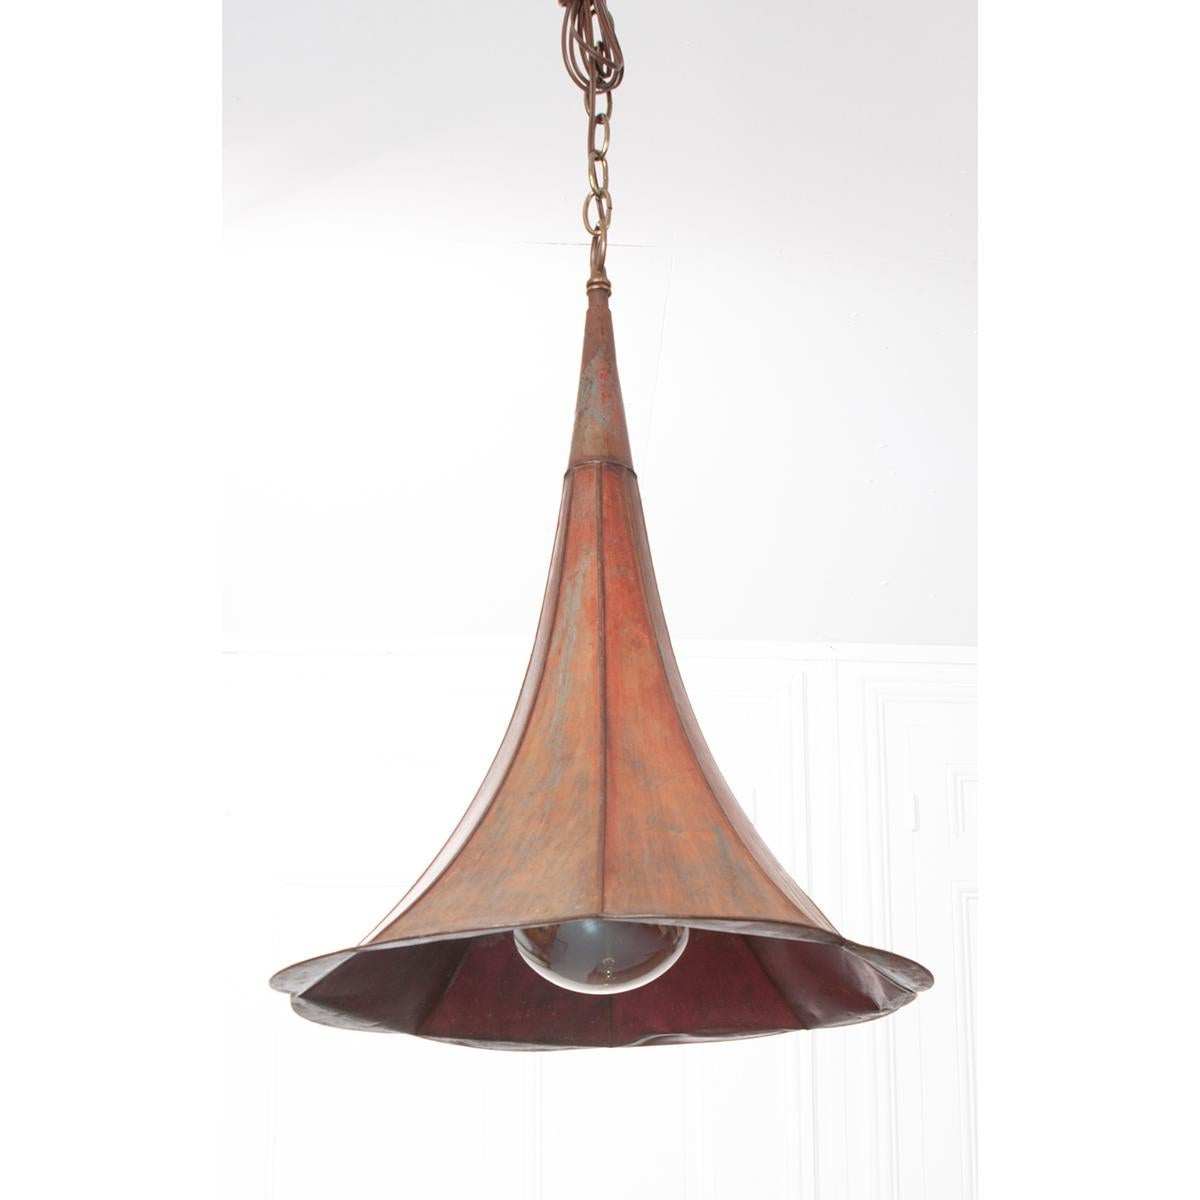 Create a striking look with this gramophone pendant light. It has a distressed, reddish painted finish and the original side support cradle bracket. This lantern is suspended with an antique-style chain.
   